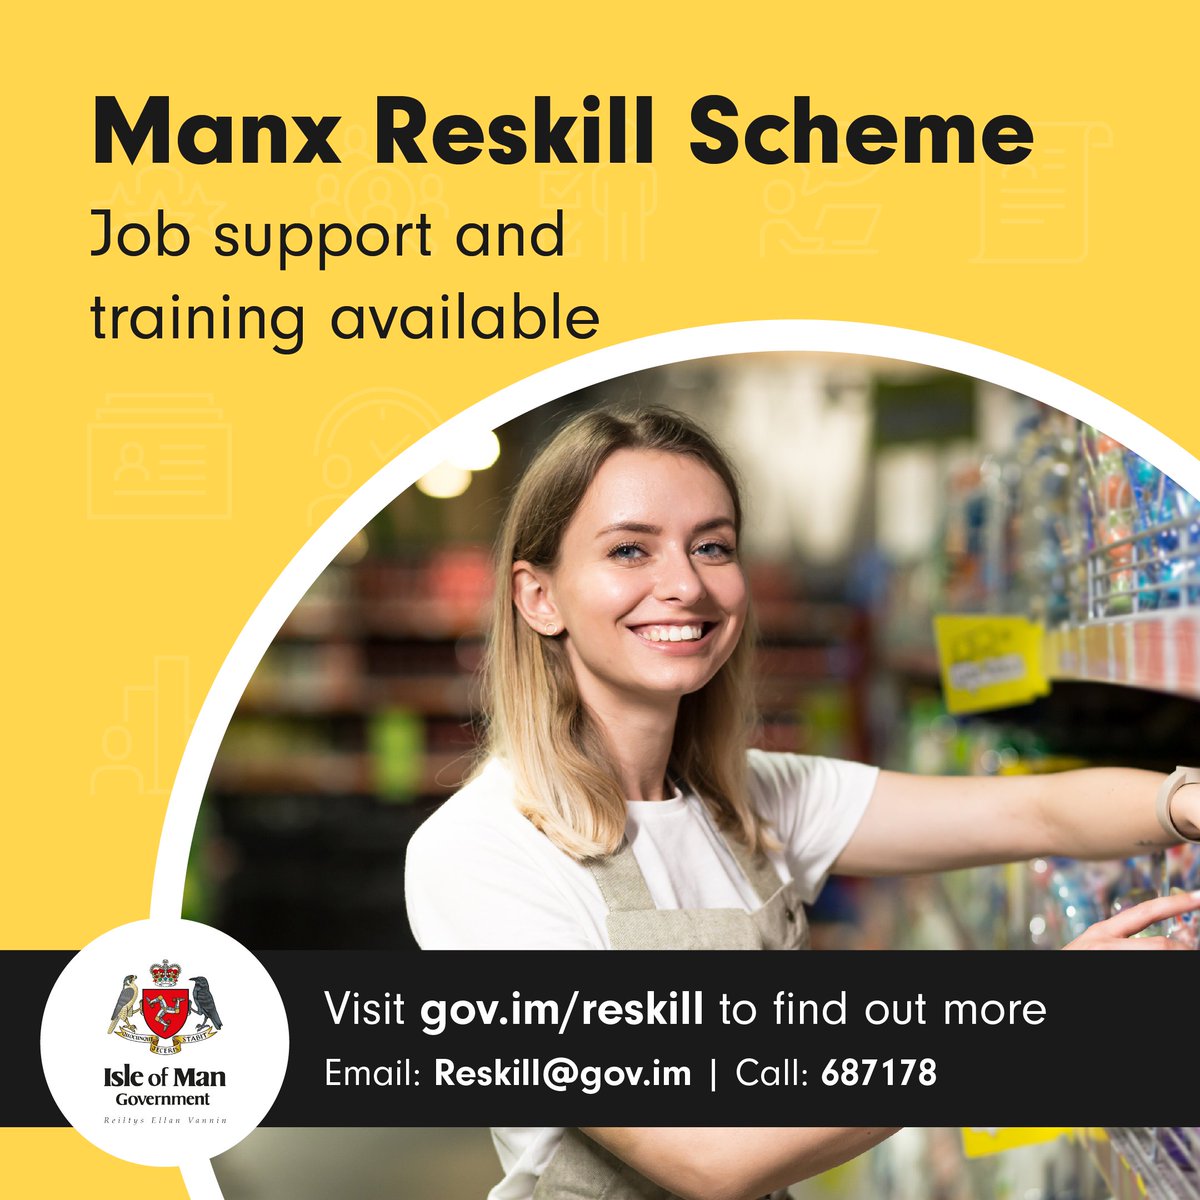 The Manx Reskill Scheme offers job opportunities to people with long-term health conditions or disabilities. Roles are matched to skills, experience and aspirations, and full support is available. Visit gov.im/reskill. To register, email reskill@gov.im or call 687178.